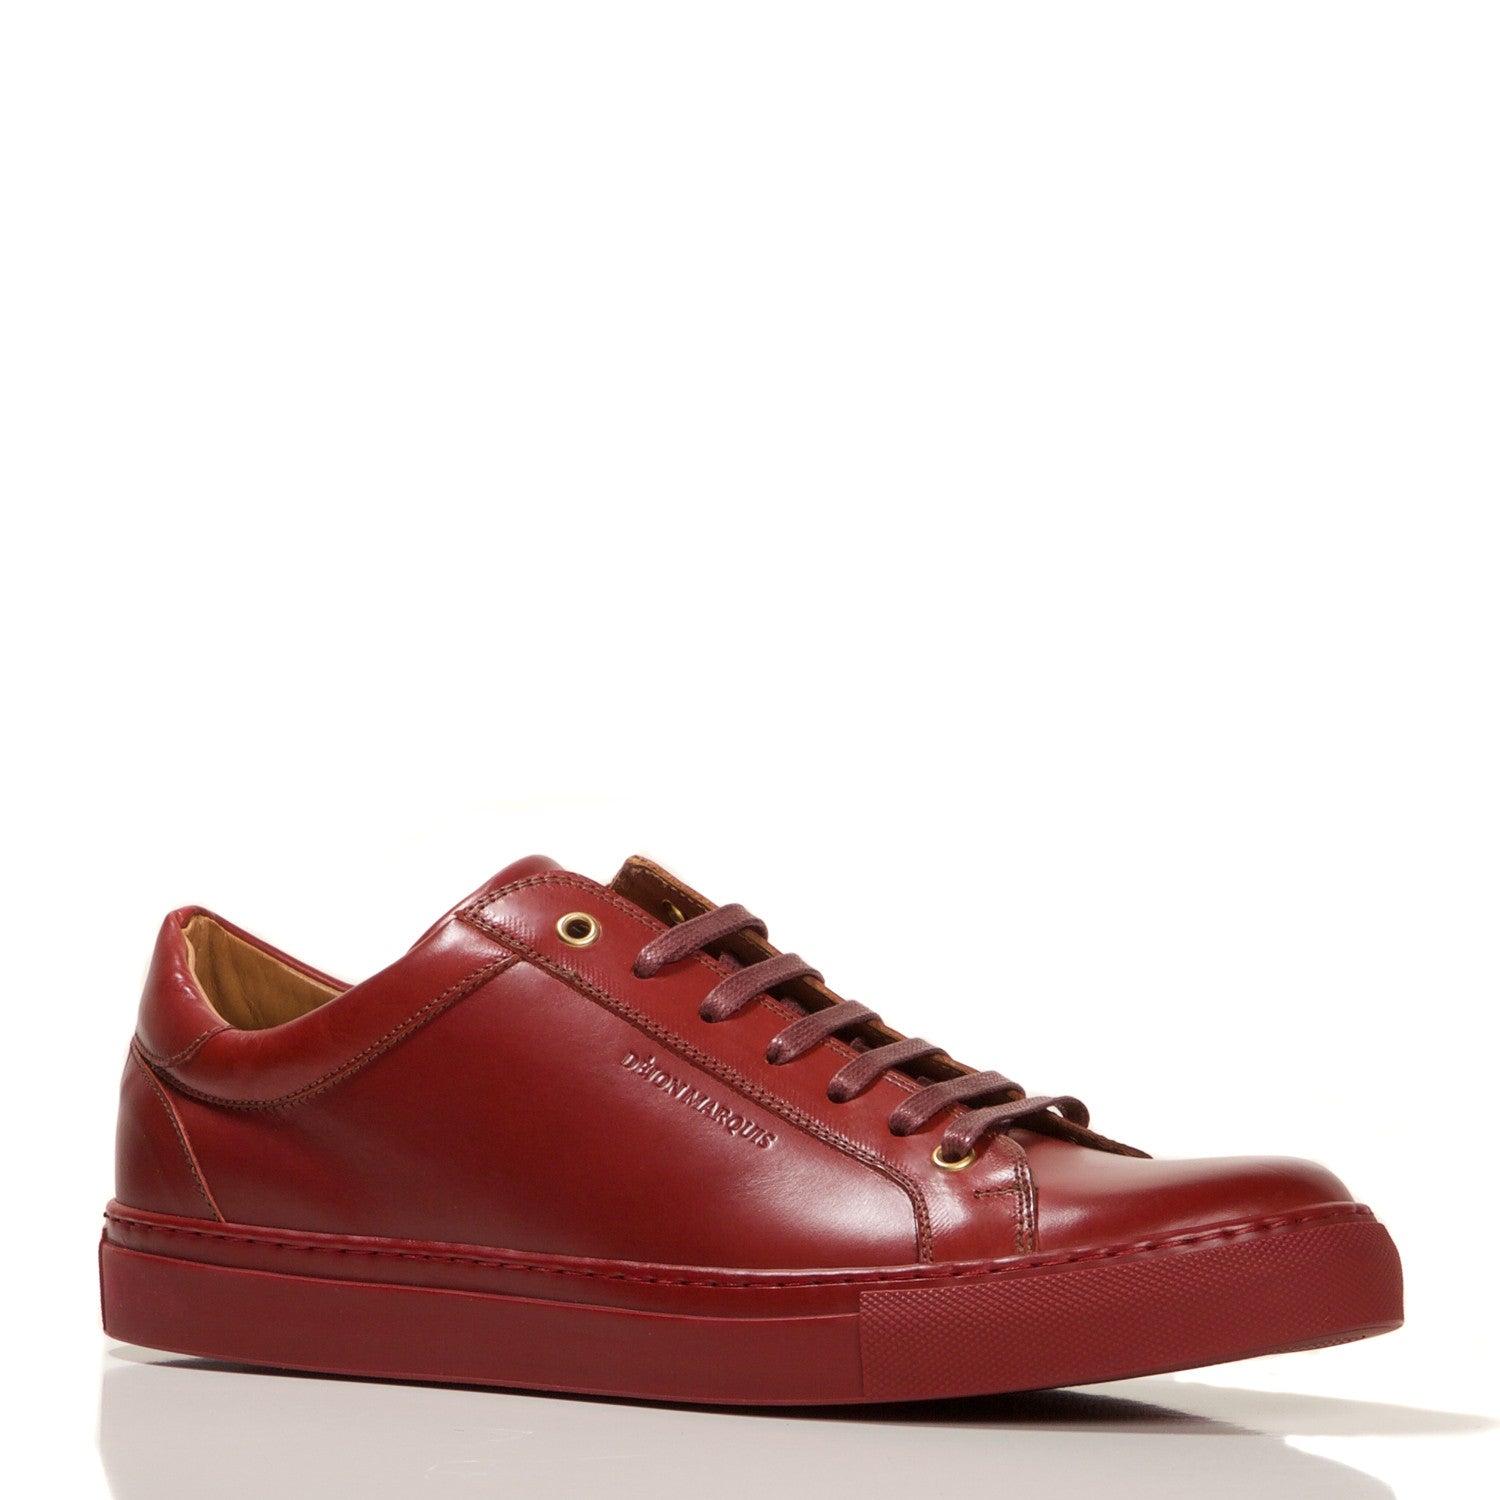 CHERRY LOW TOP TAILORED SNEAKER